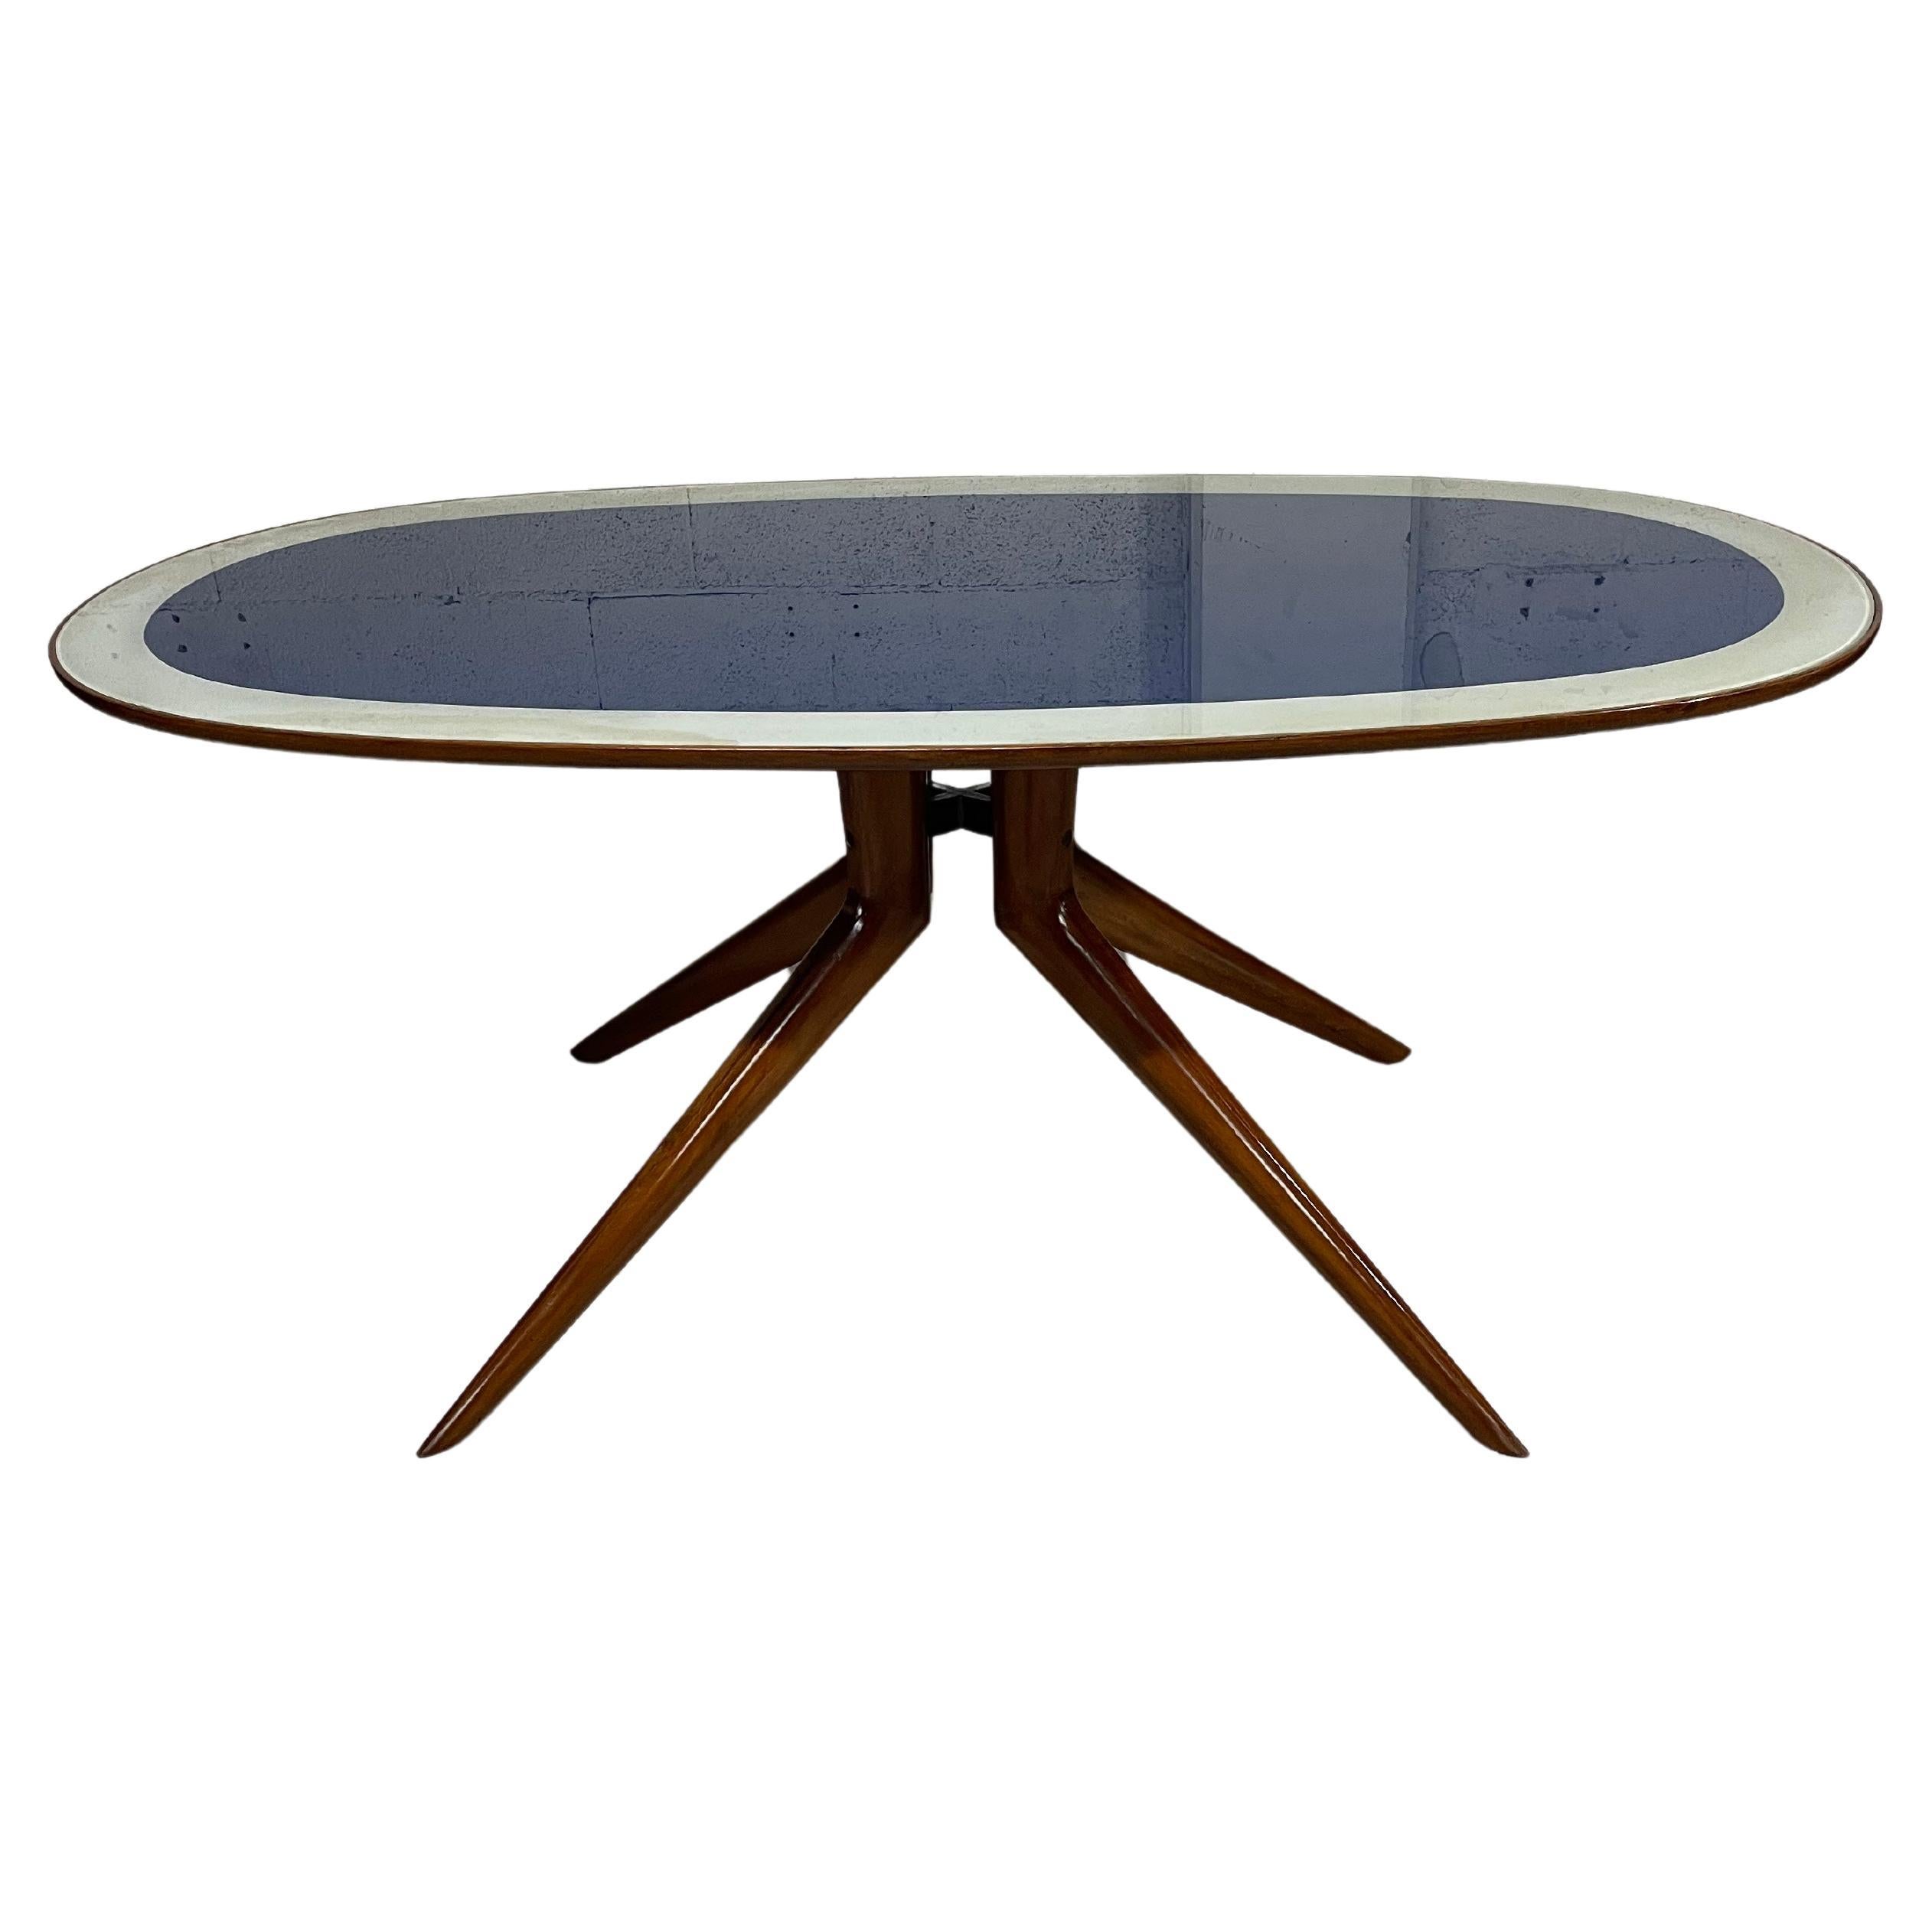 1950s oval table made of beech wood and glass top